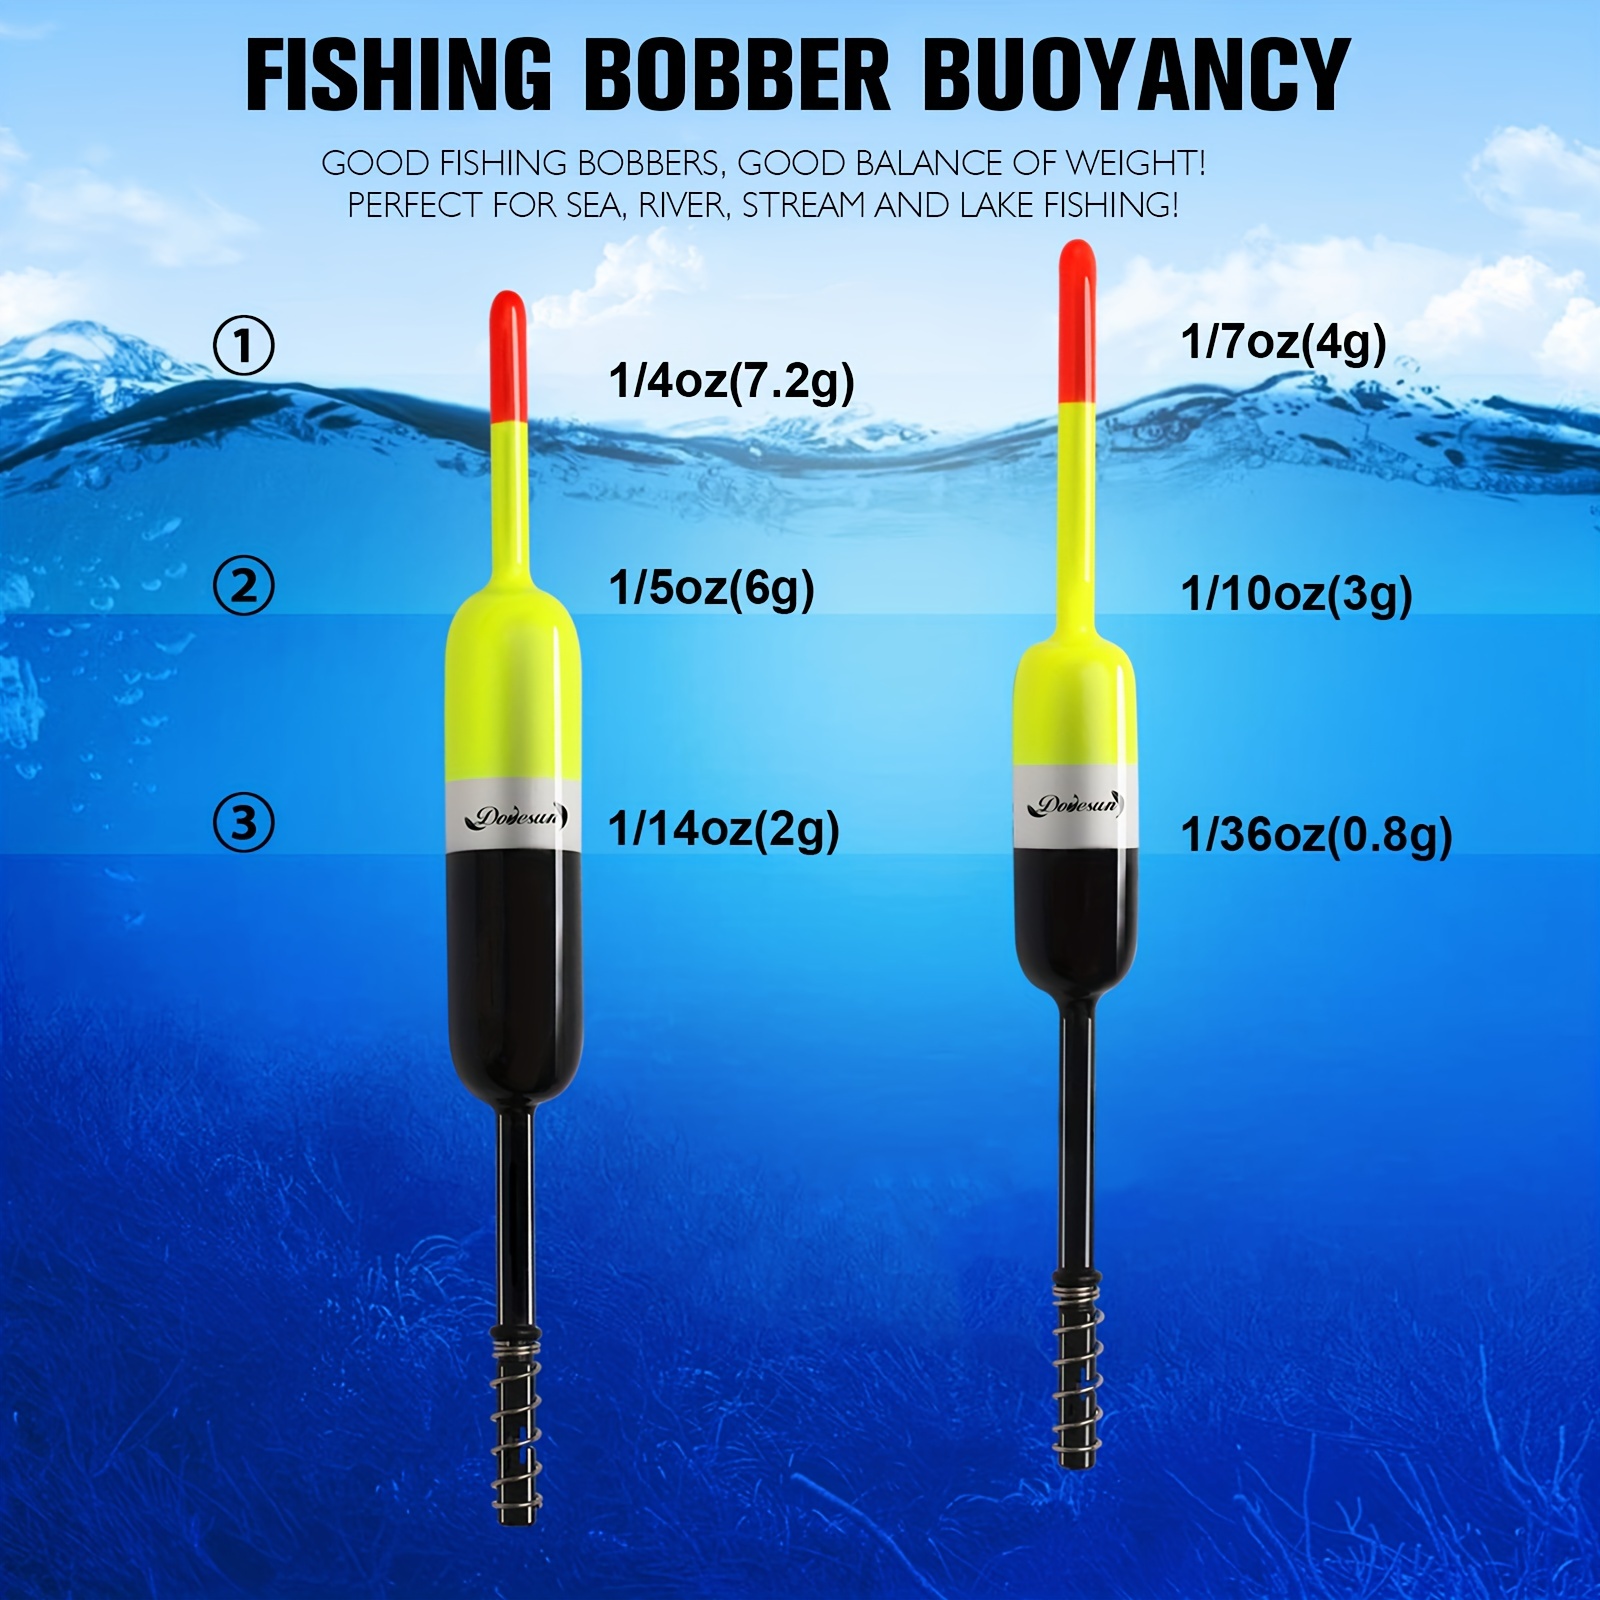 Estink Foam Slip Bobbers, Adjustable Fishing Bobber Floats For Sea Fishing For Crappie Bass Trout Fishing Self-Locking, 6x1.62x1.14 Inches Self-Lockin